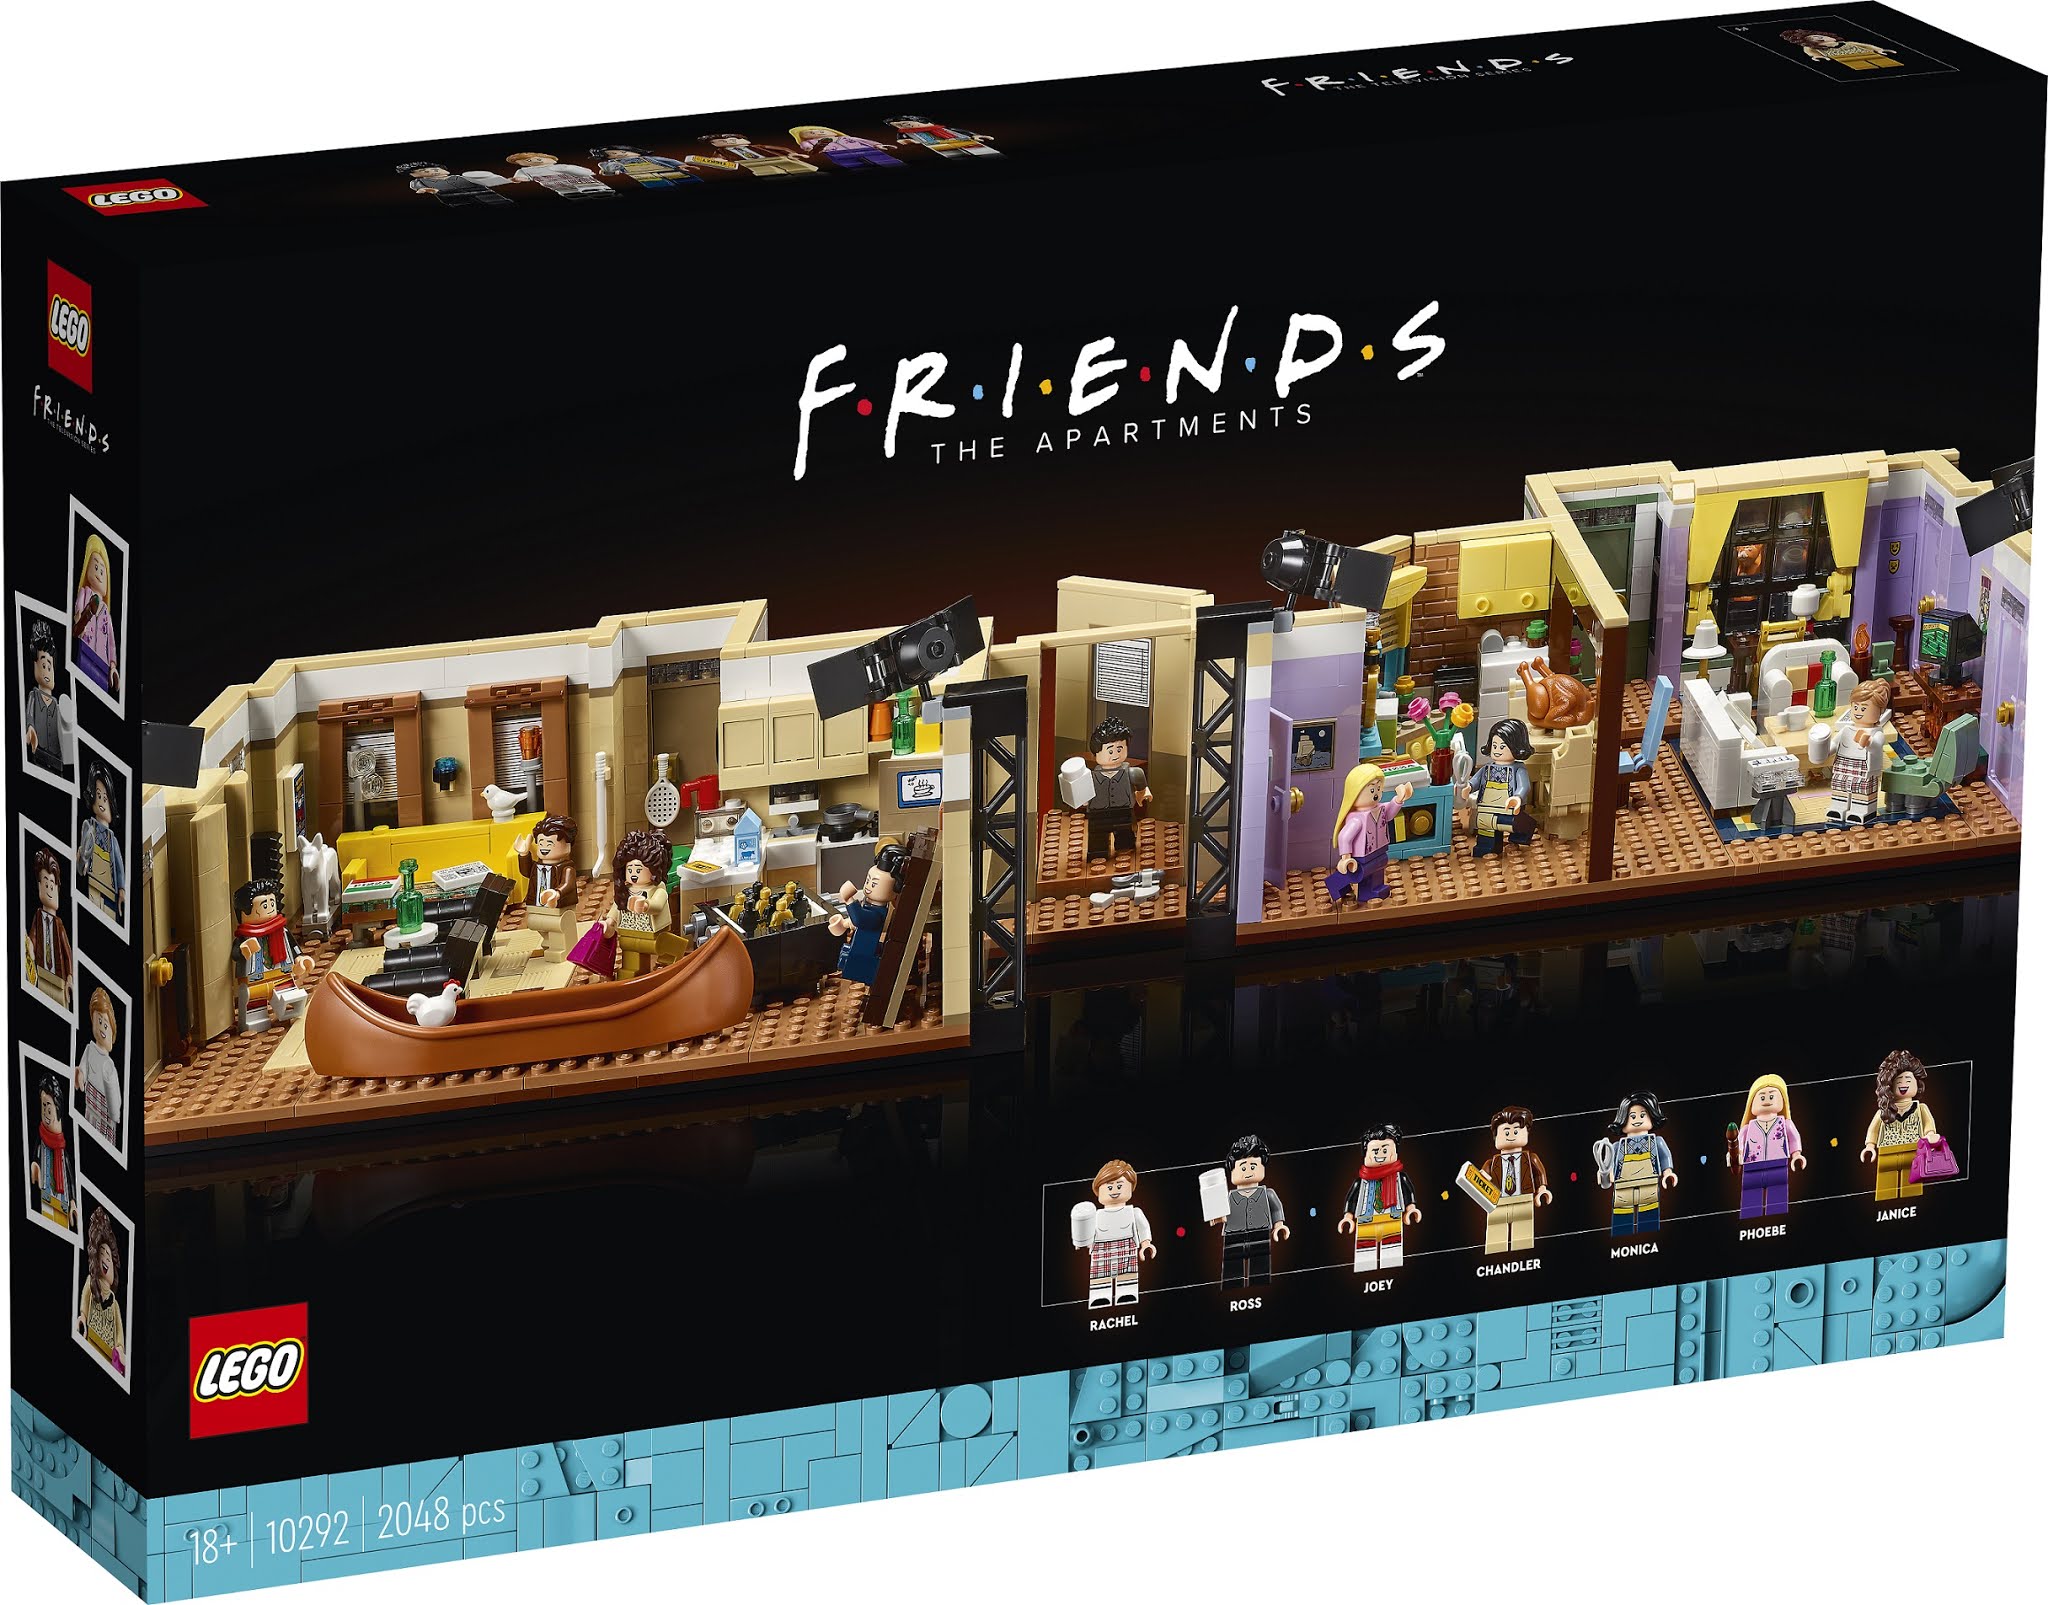 New 2,048-piece LEGO F.R.I.E.N.D.S Apartments Set out now